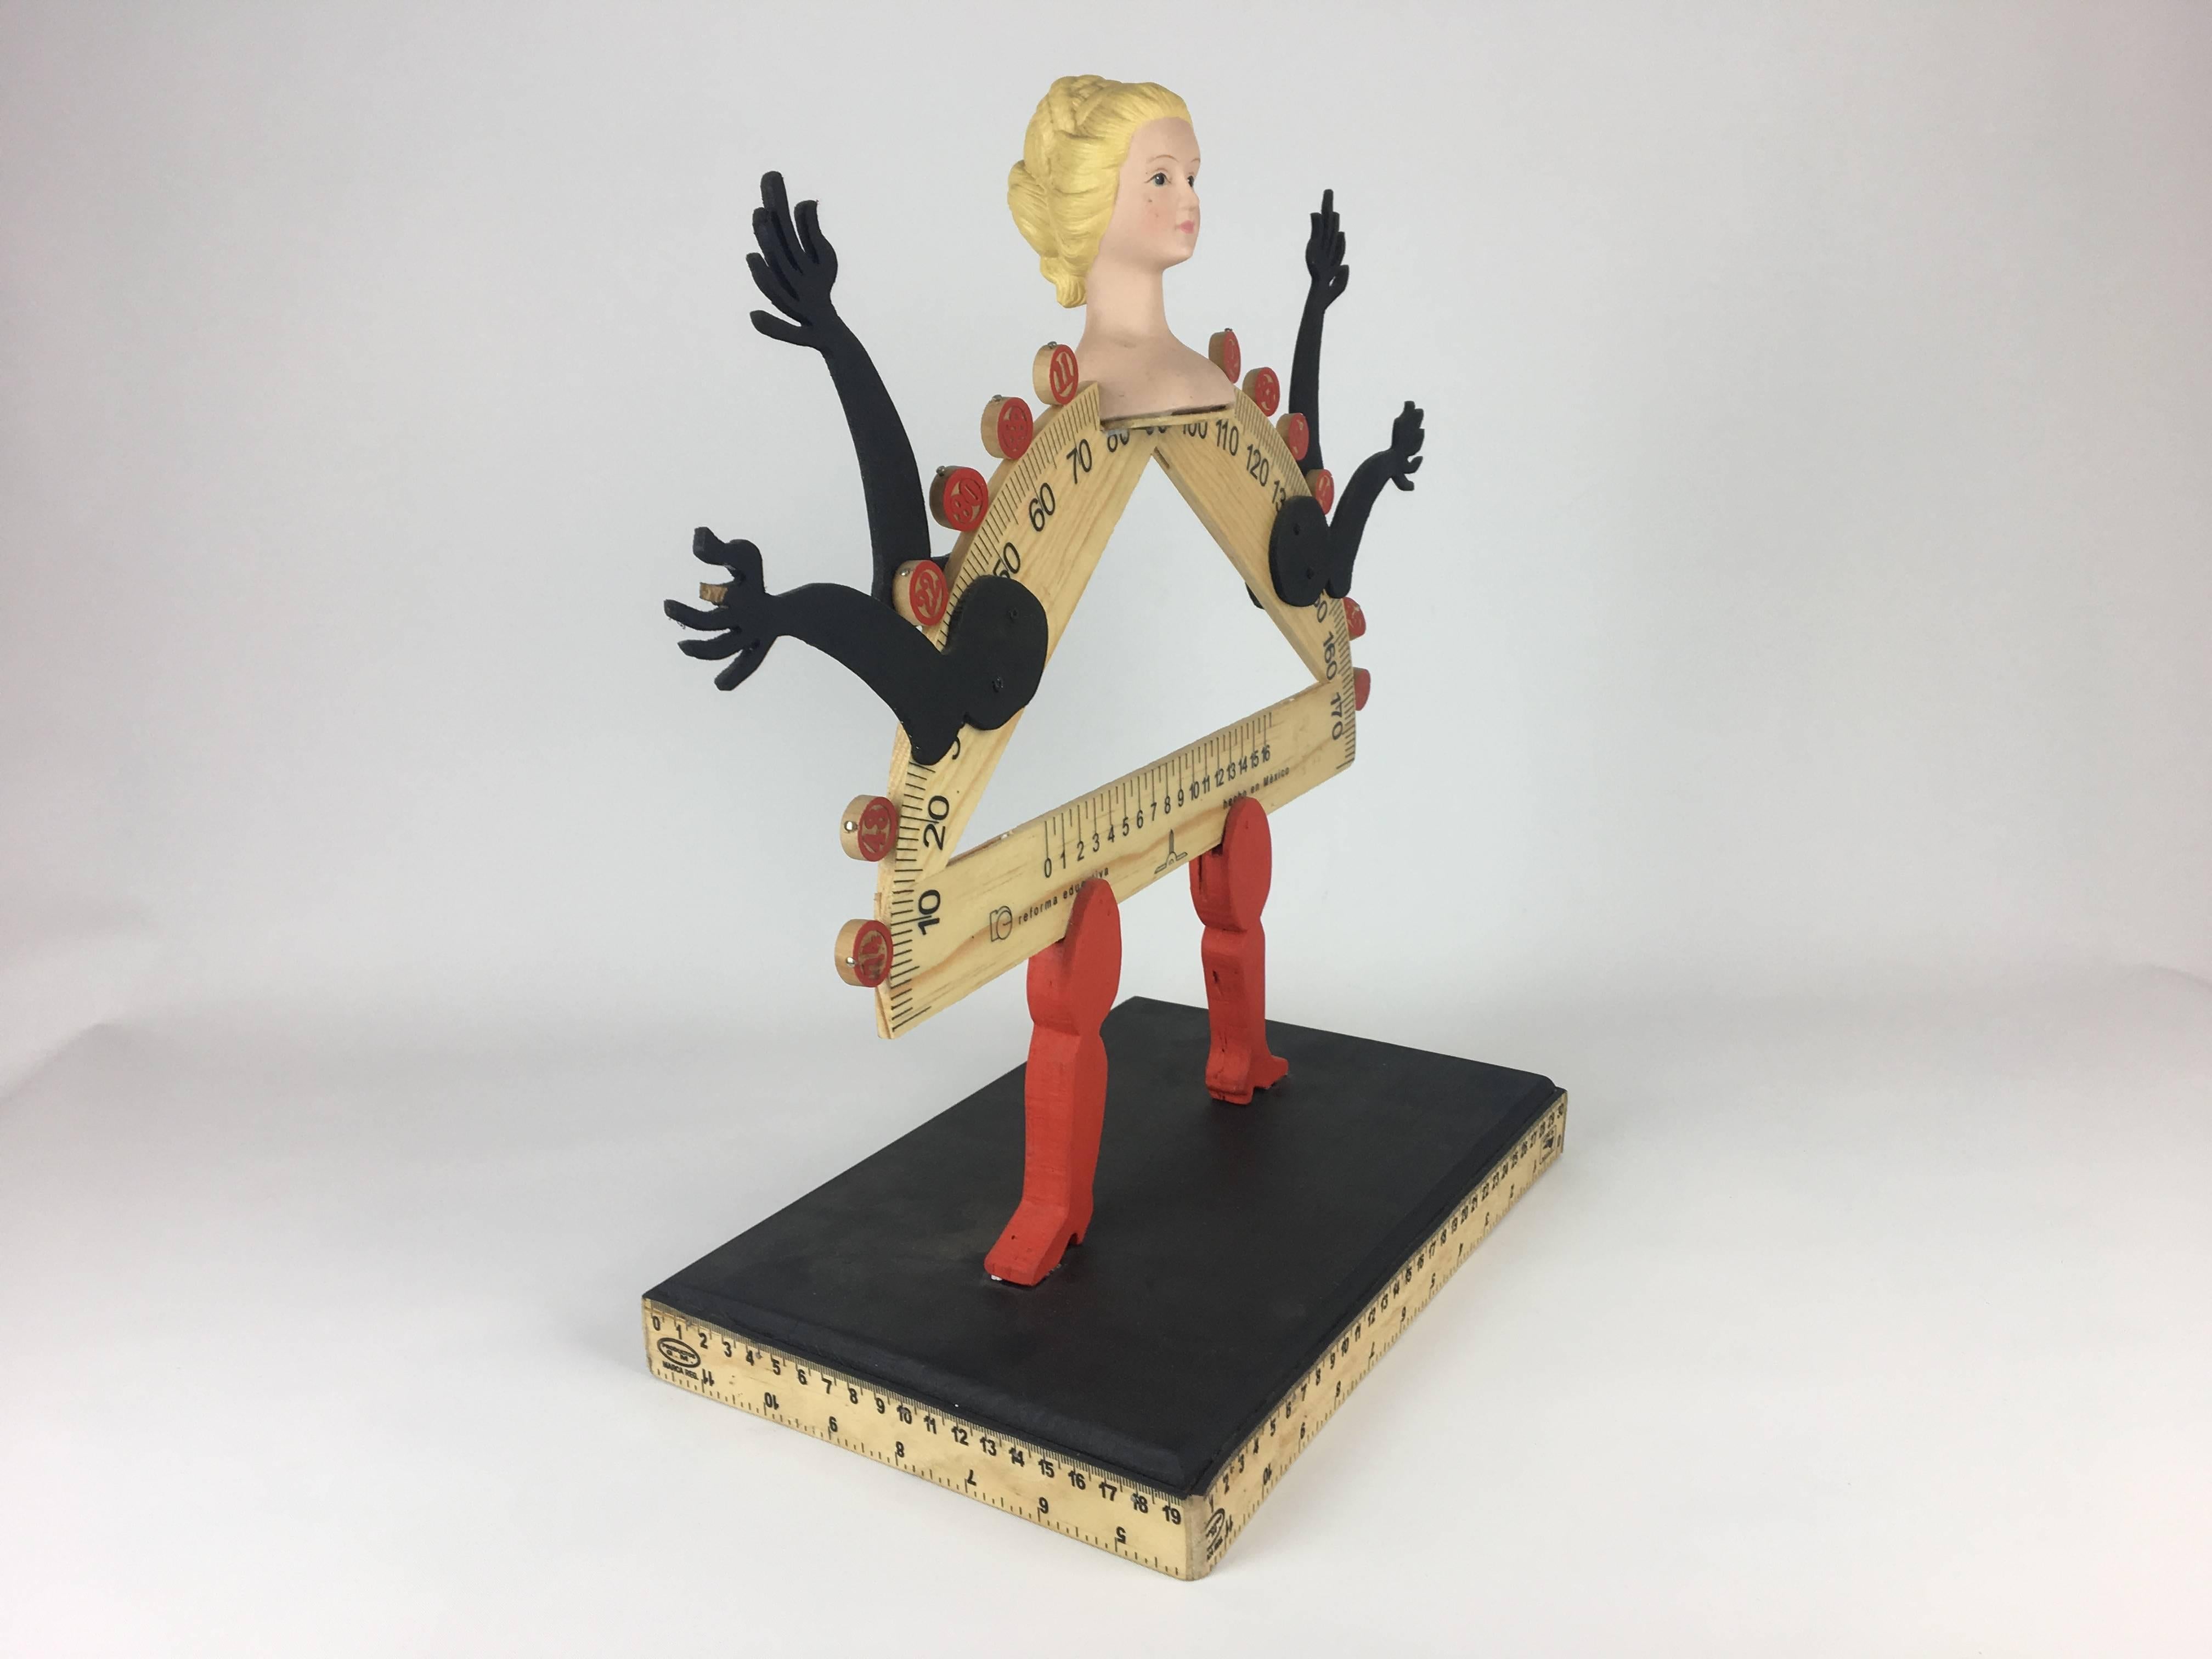 Rare Pedro Friedeberg sculpture made in wood and resin. Sealed on back.

Pedro Friedeberg is a Mexican artist and designer known by his surrealist work filled with lines and colors, as well as ancient and religious symbols. His best known piece is